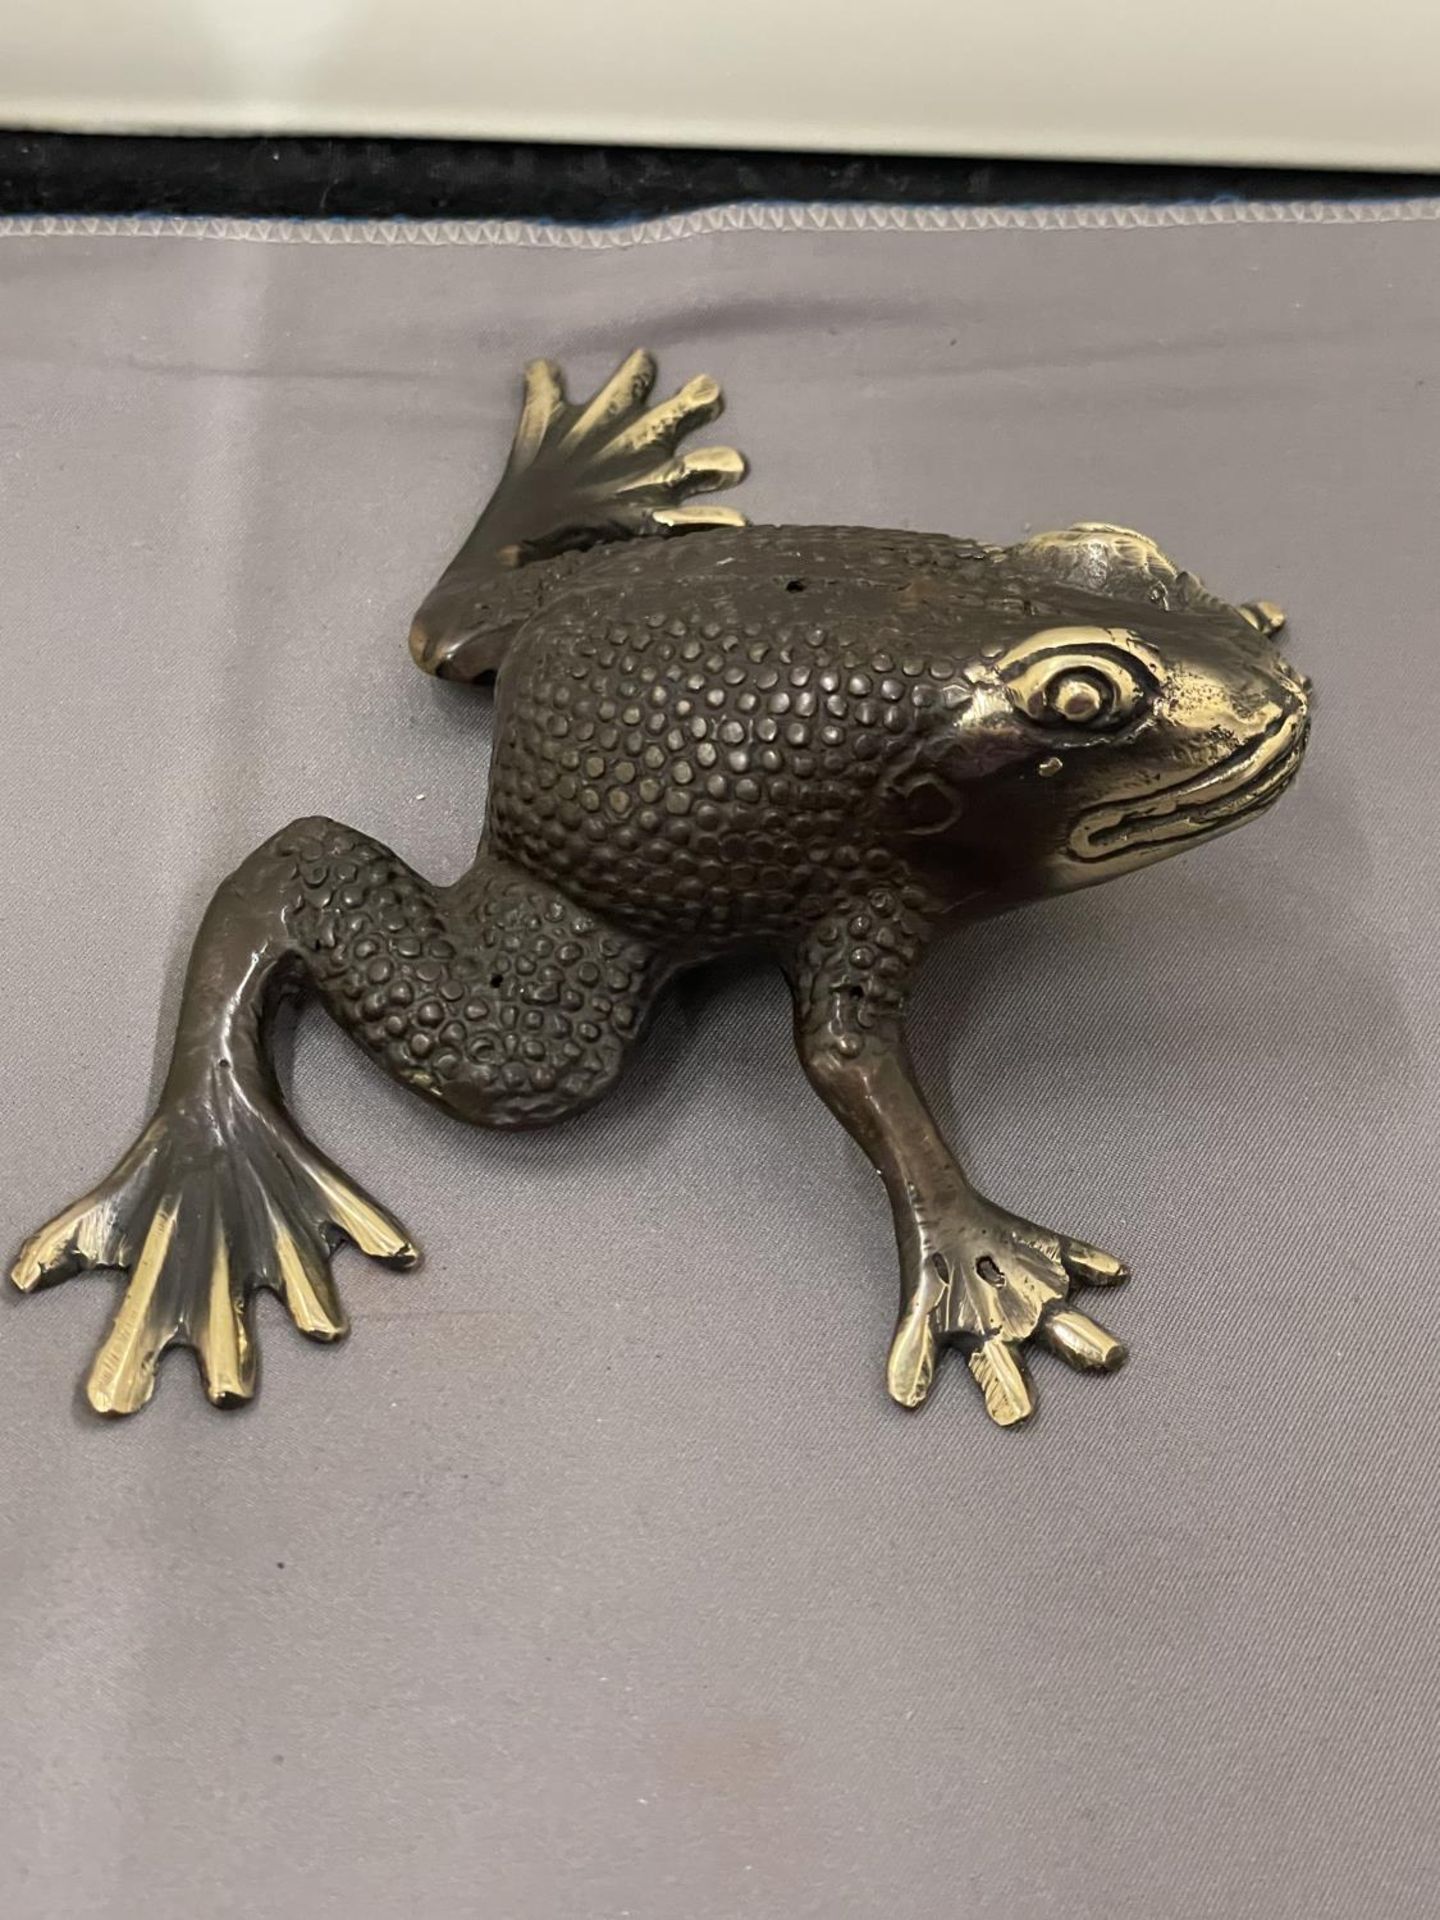 A BRONZE FIGURE OF A FROG - Image 4 of 6